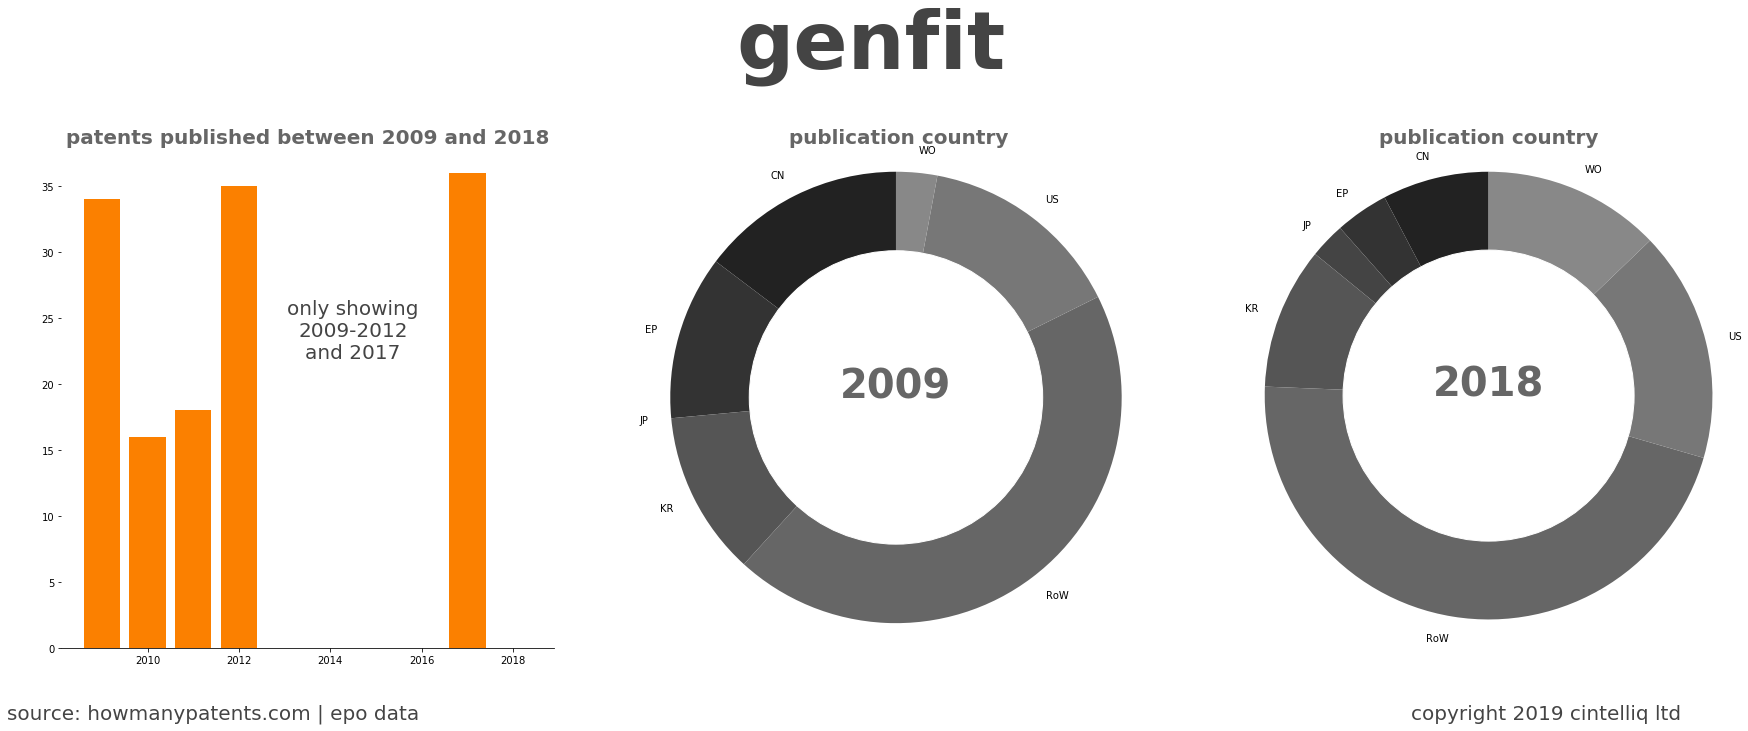 summary of patents for Genfit